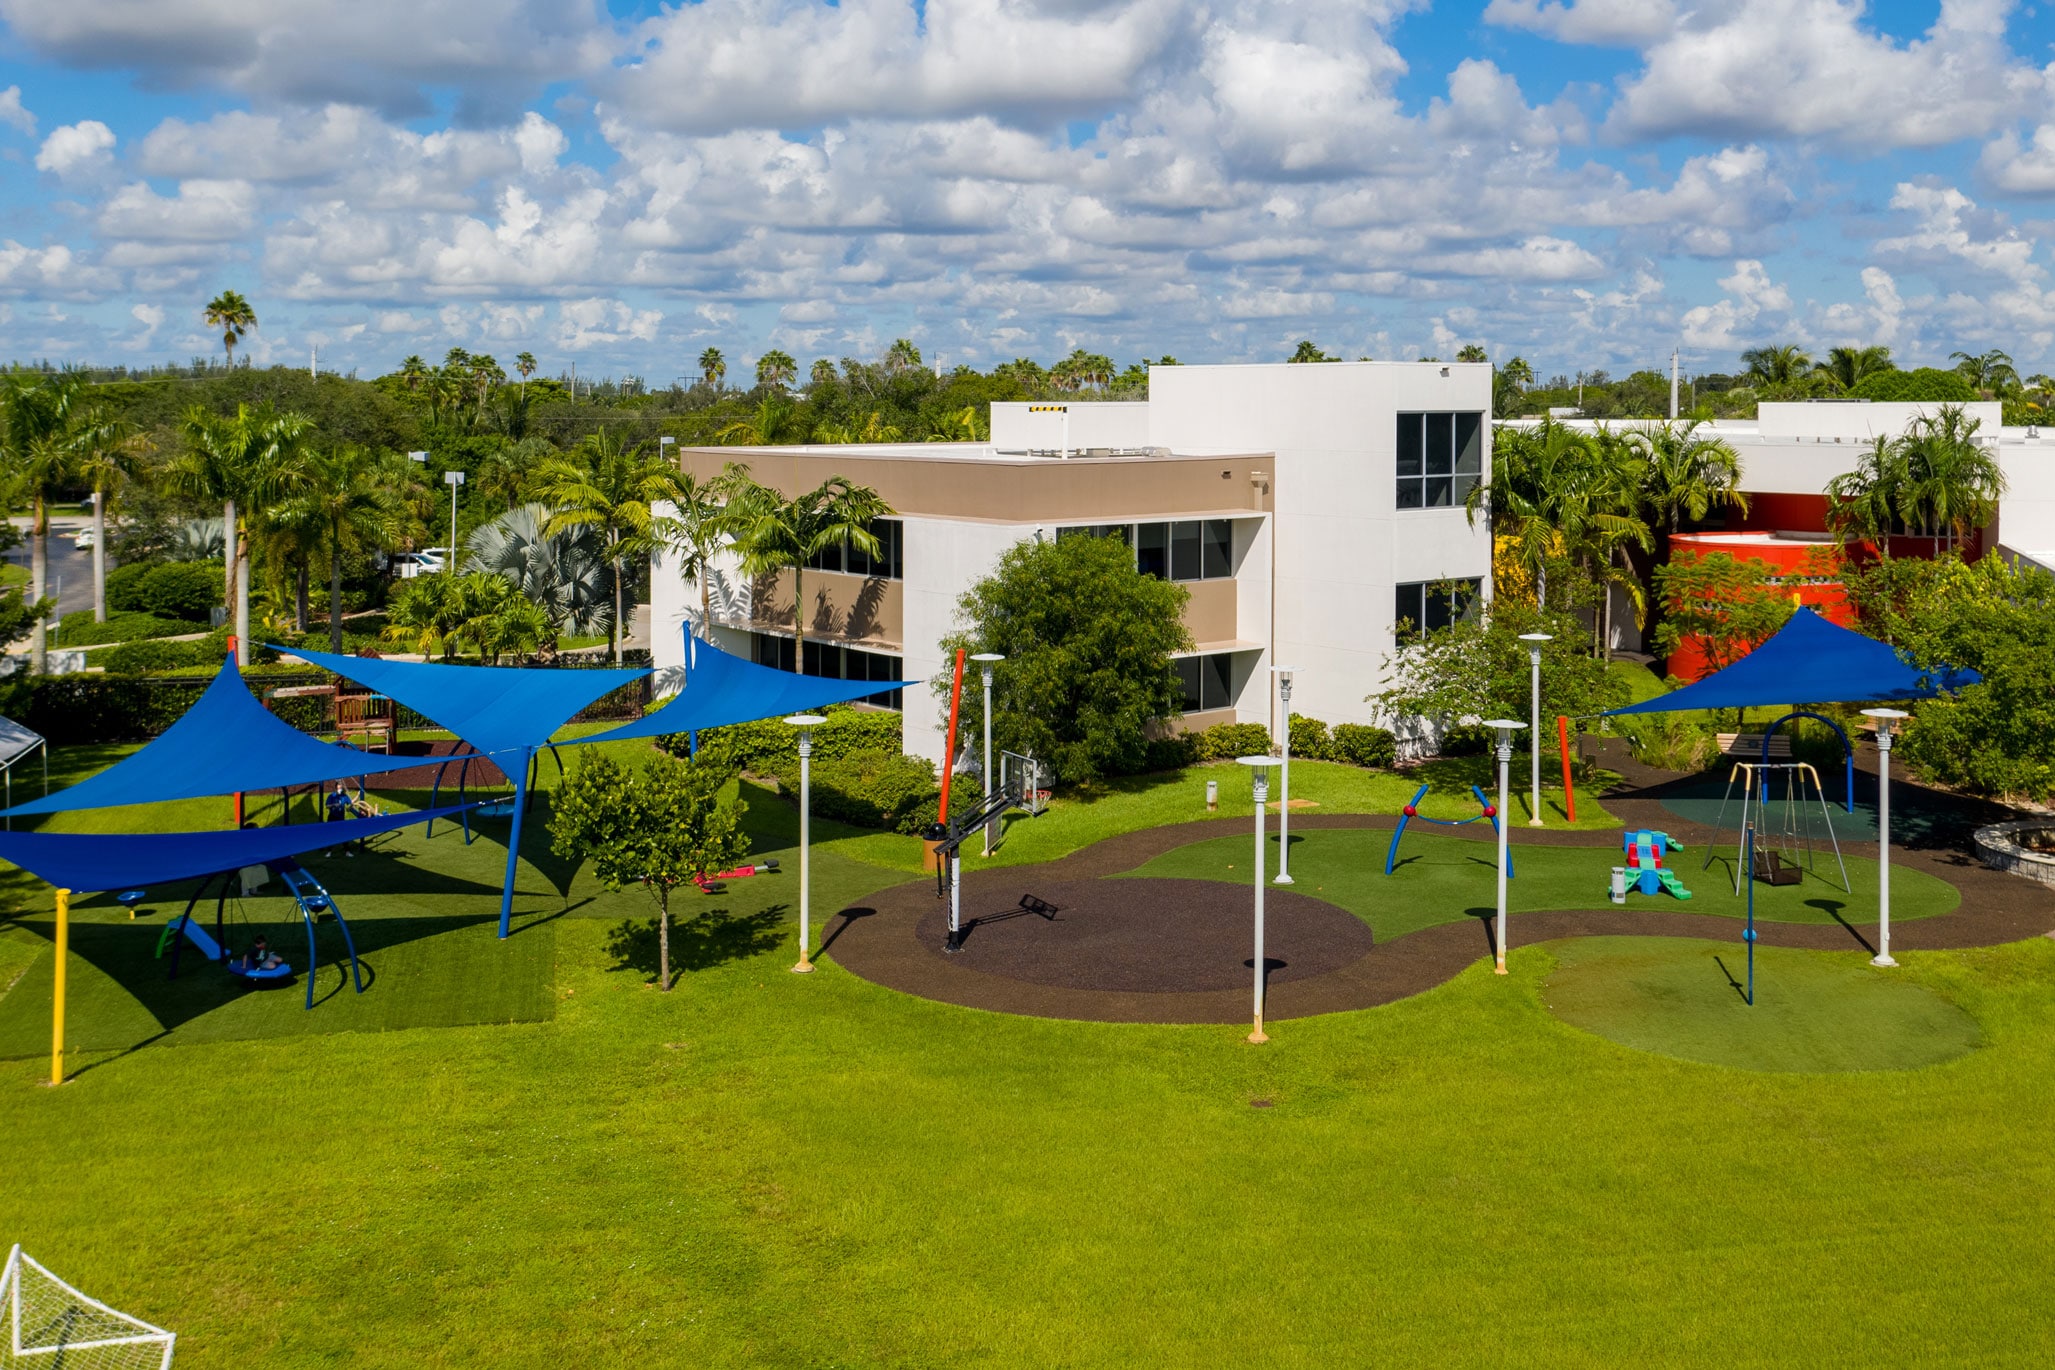 NeverFade Façade Coatings Give JAFCO Children’s Center a Bright and Welcoming Upgrade